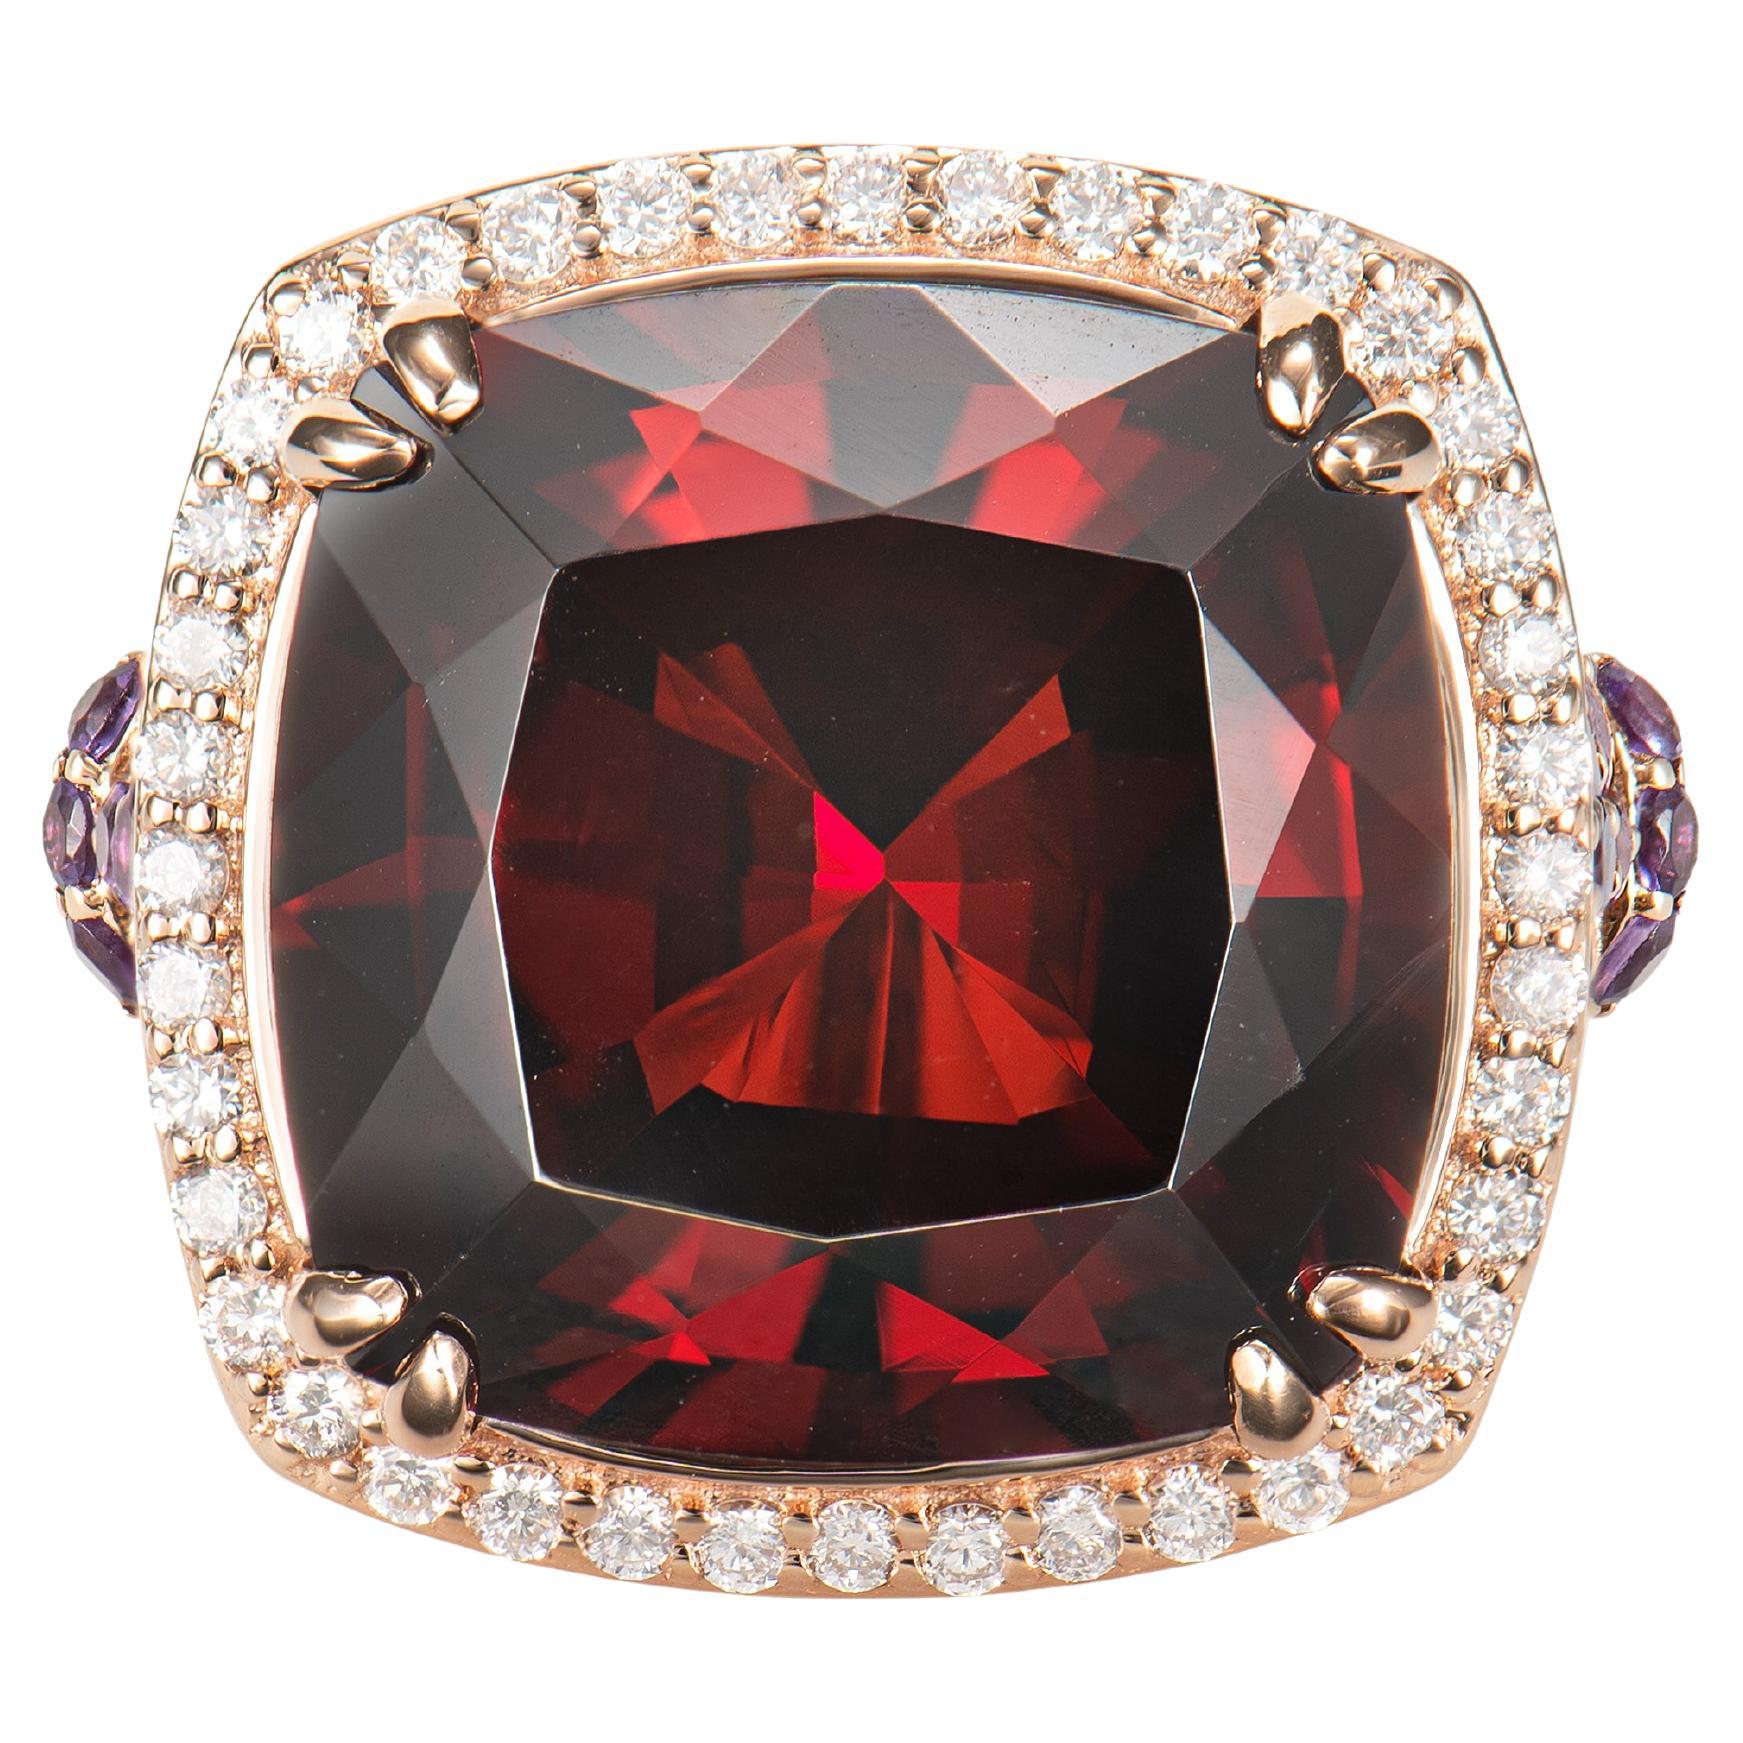 13.99 Carat Garnet Cocktail Ring in 18Karat Rose Gold with Amethyst and Diamond. For Sale